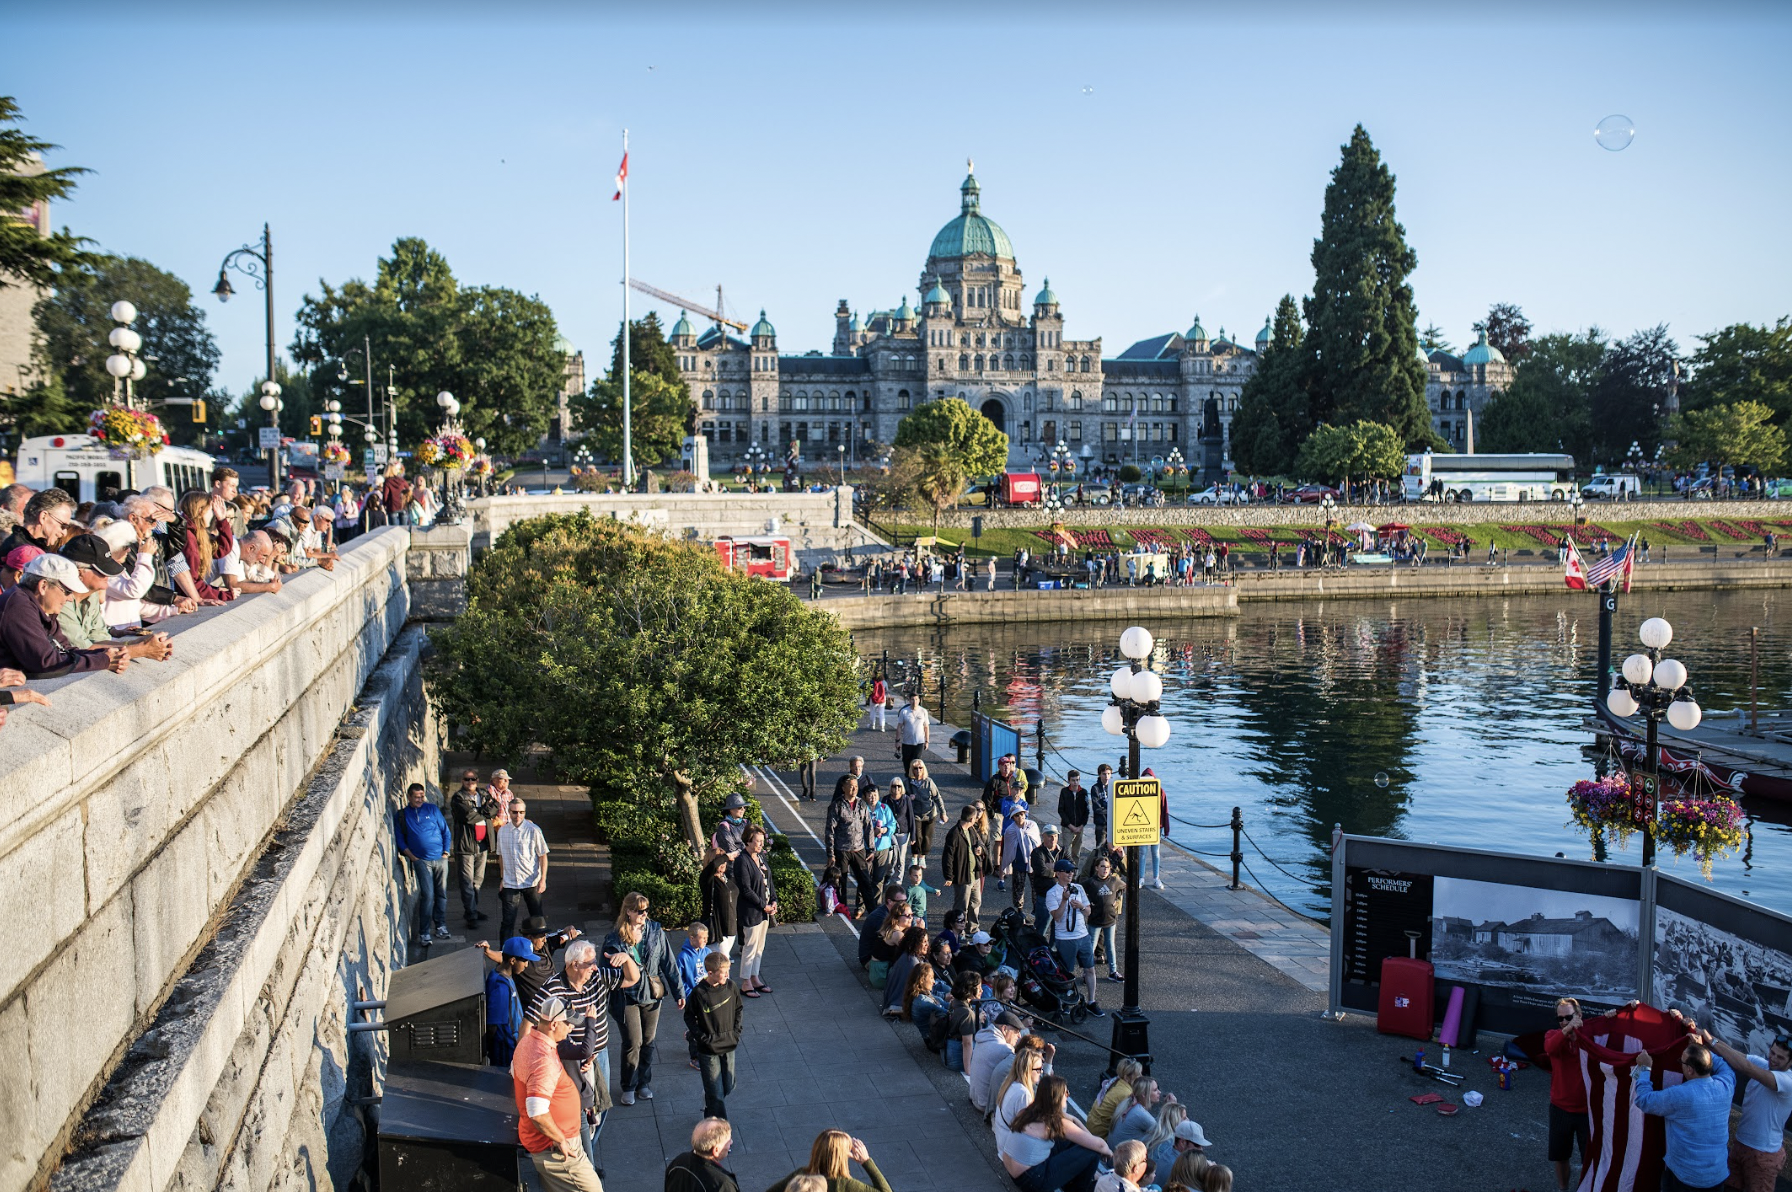 Victoria is Canada’s “best small city”